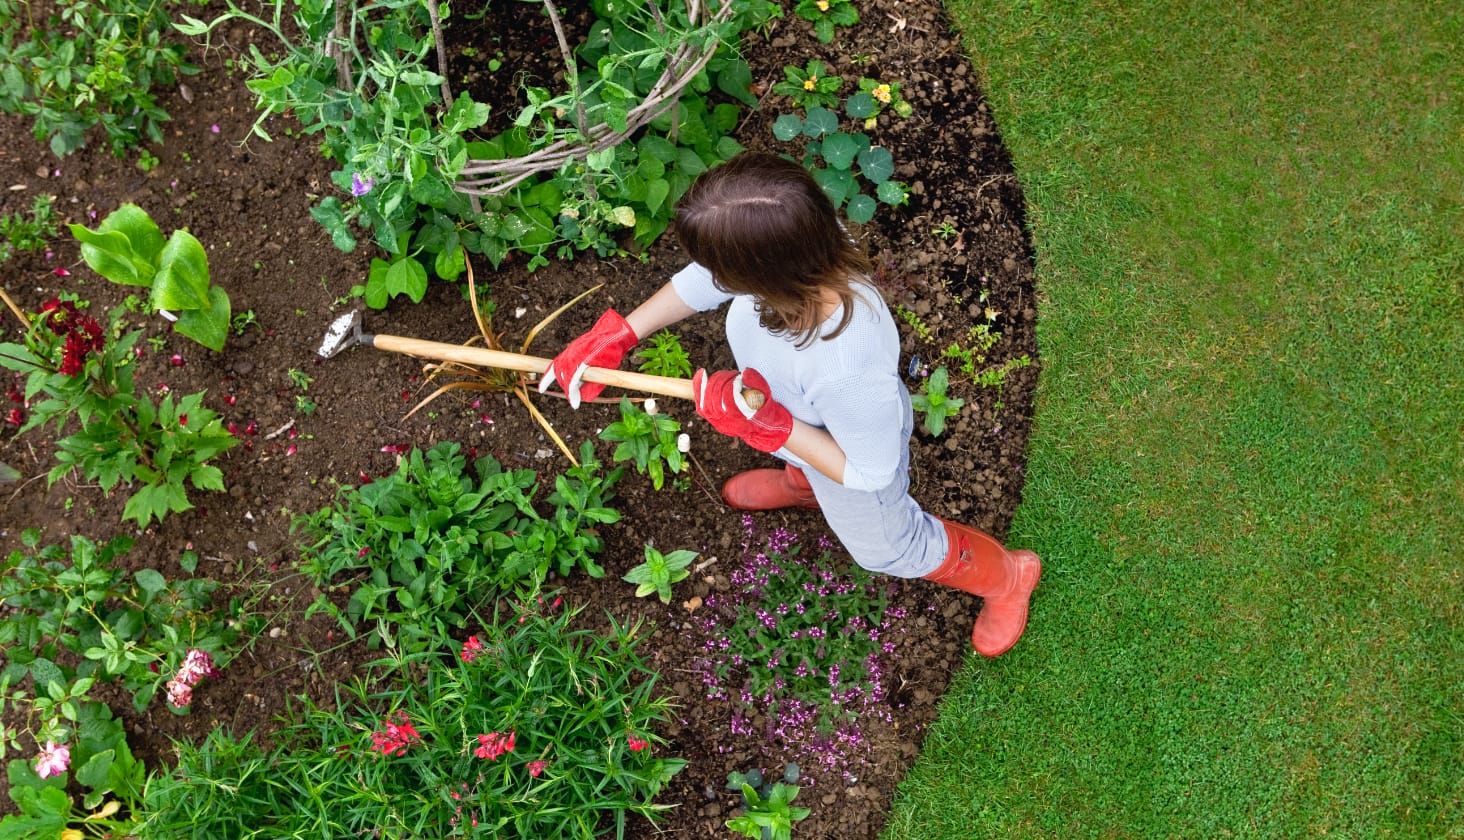 Woman with red gloves using garden shovel in soil